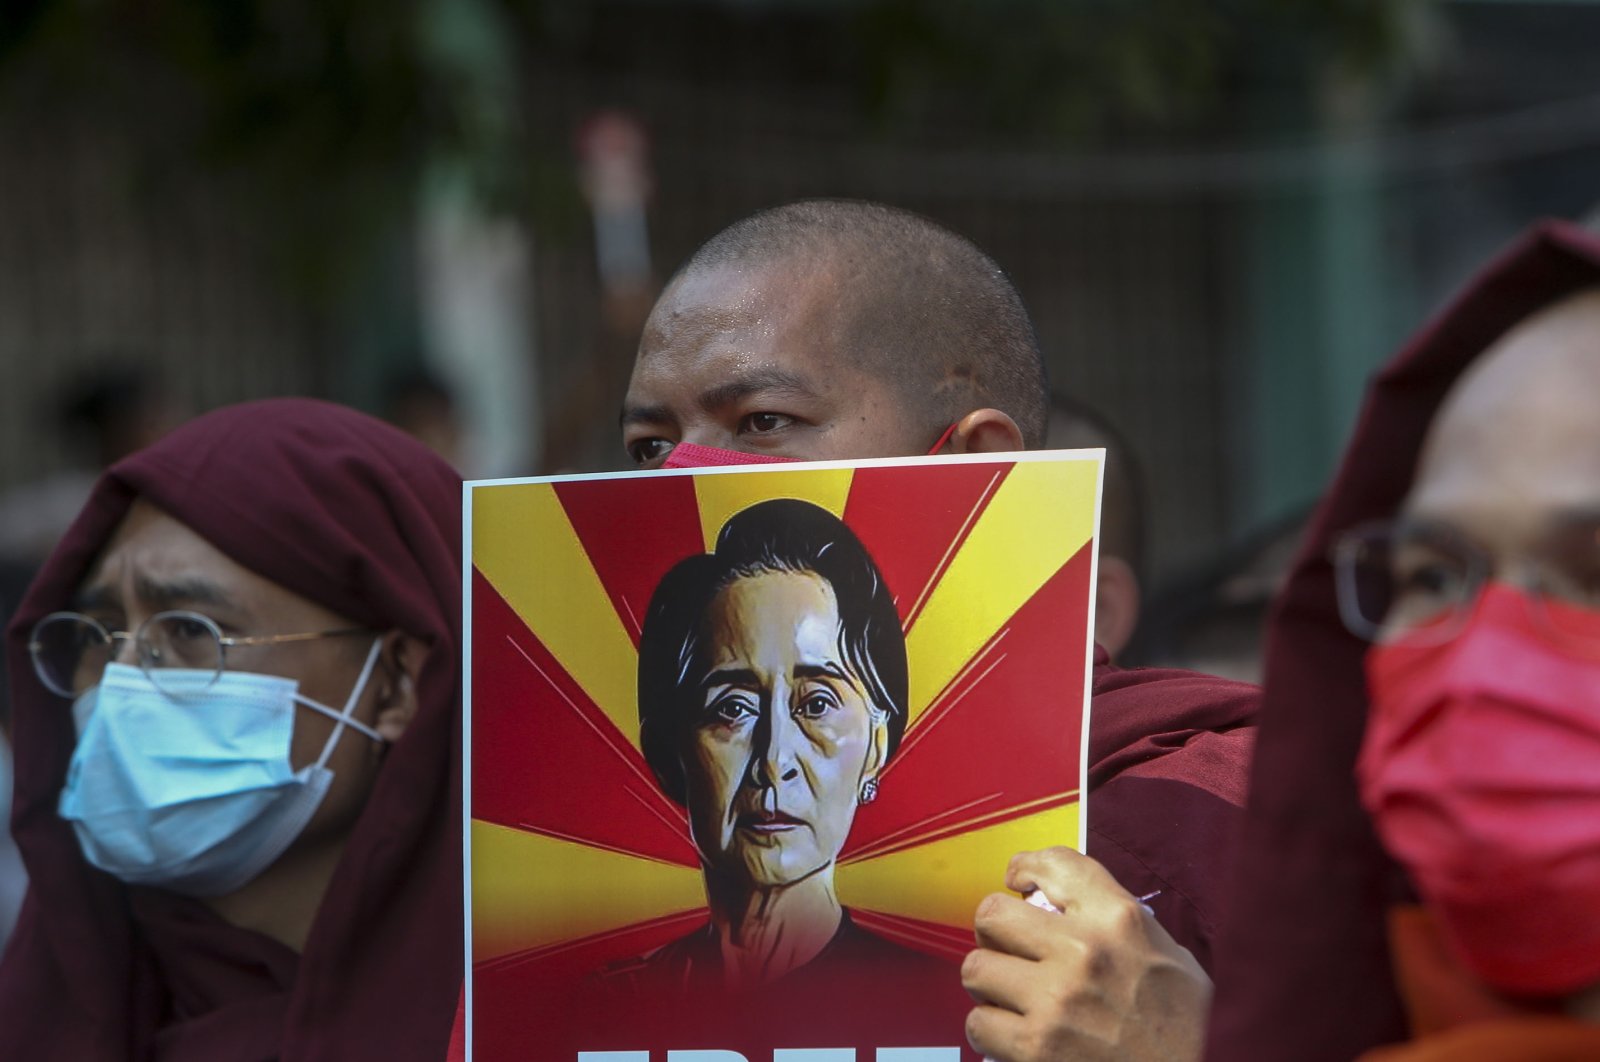 Buddhist monks display pictures of deposed leader Aung San Suu Kyi during a street march against the military coup in Mandalay, Myanmar, Feb. 12, 2021. (AP Photo)